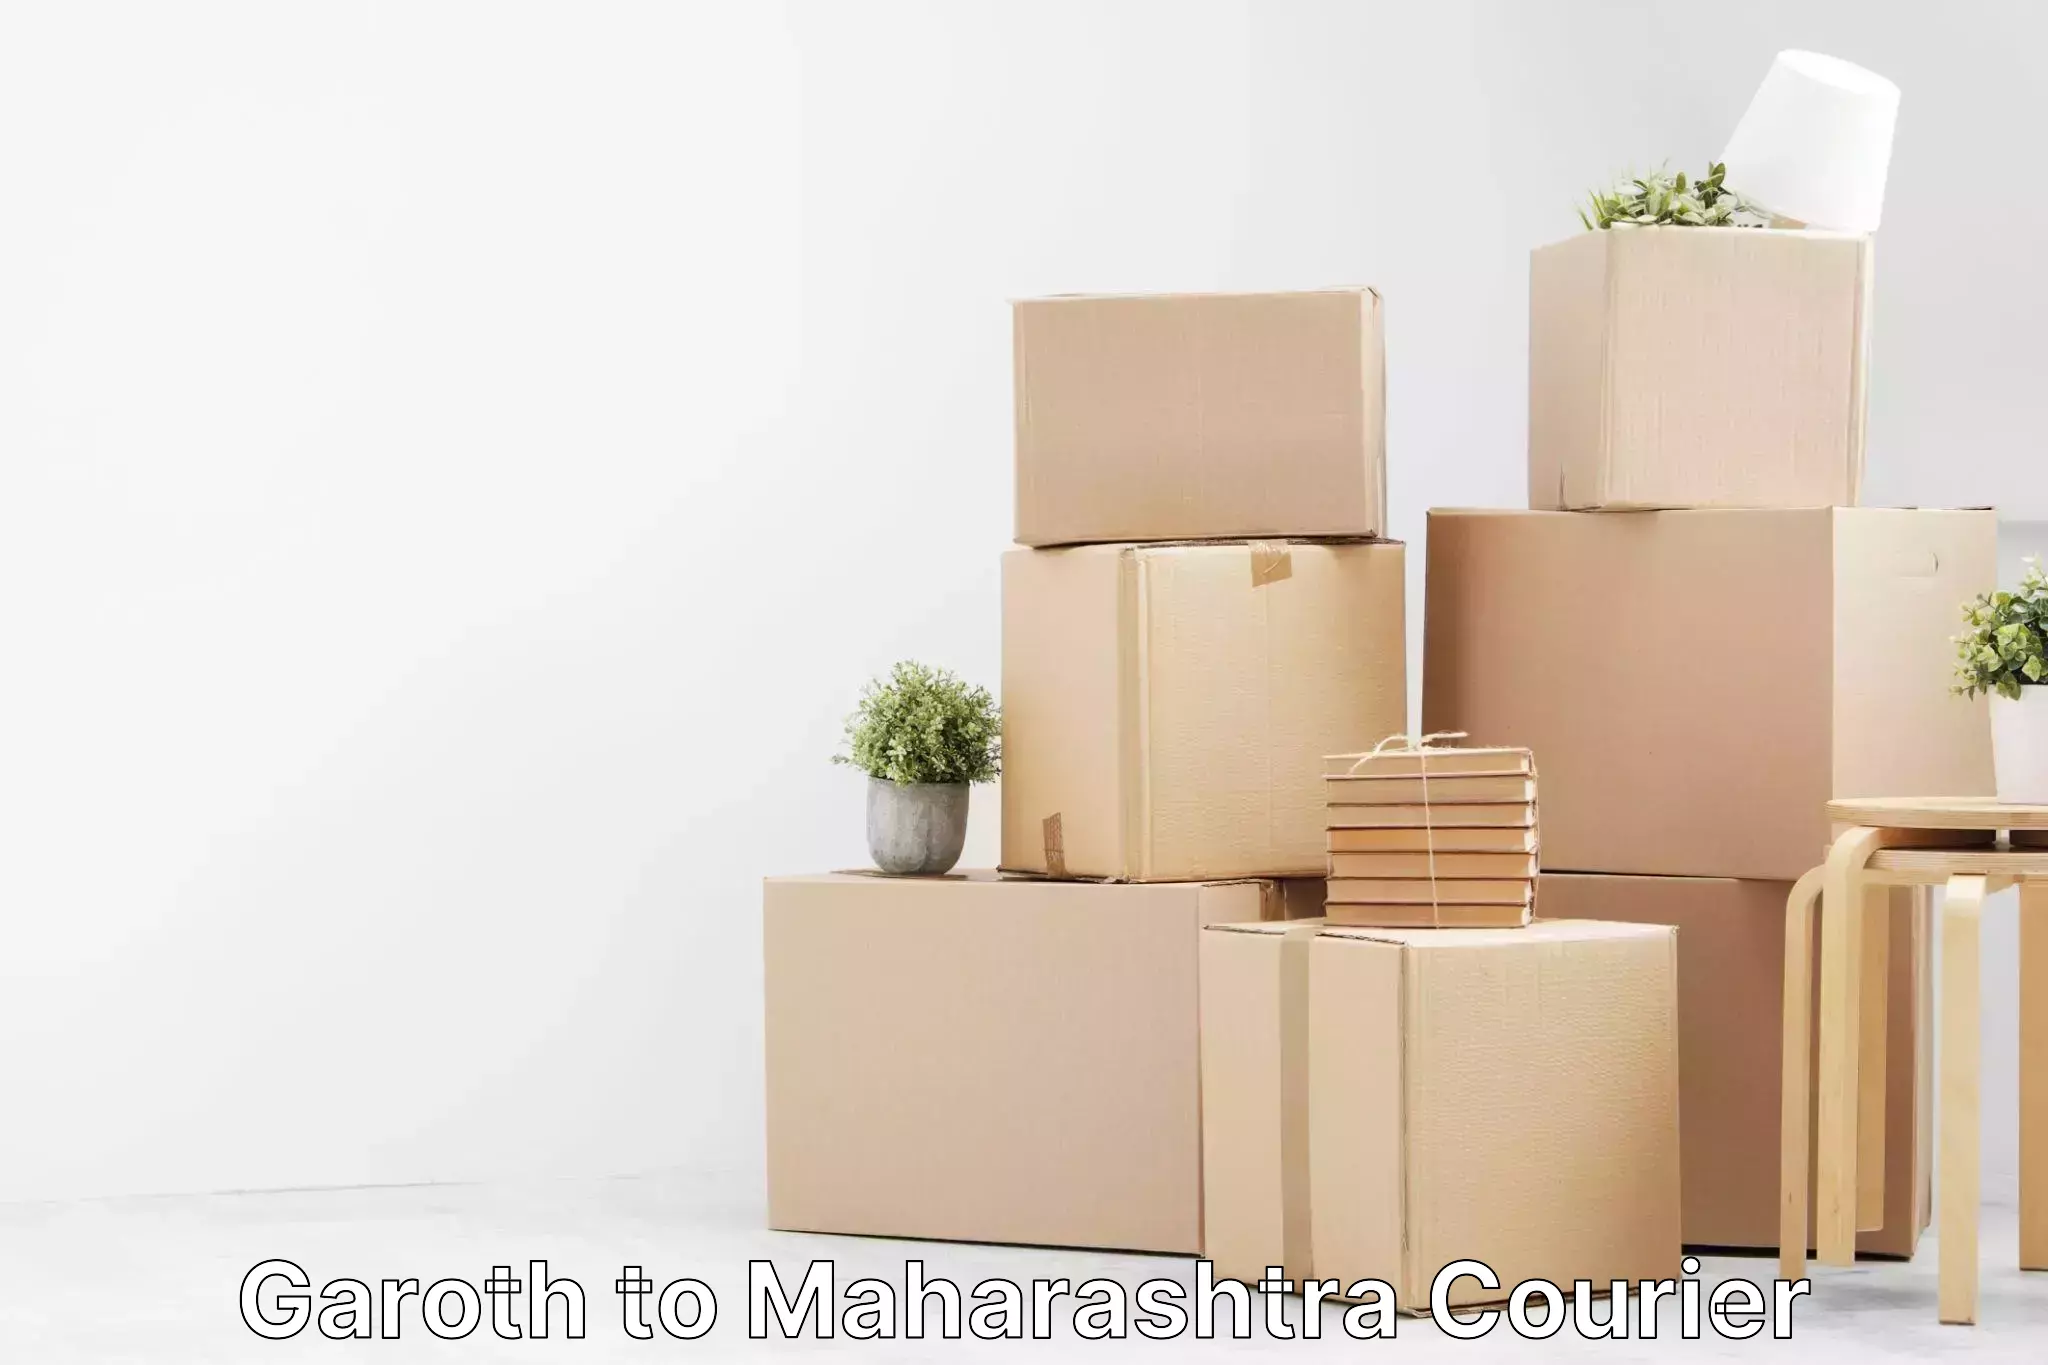 Reliable parcel services in Garoth to Maharashtra